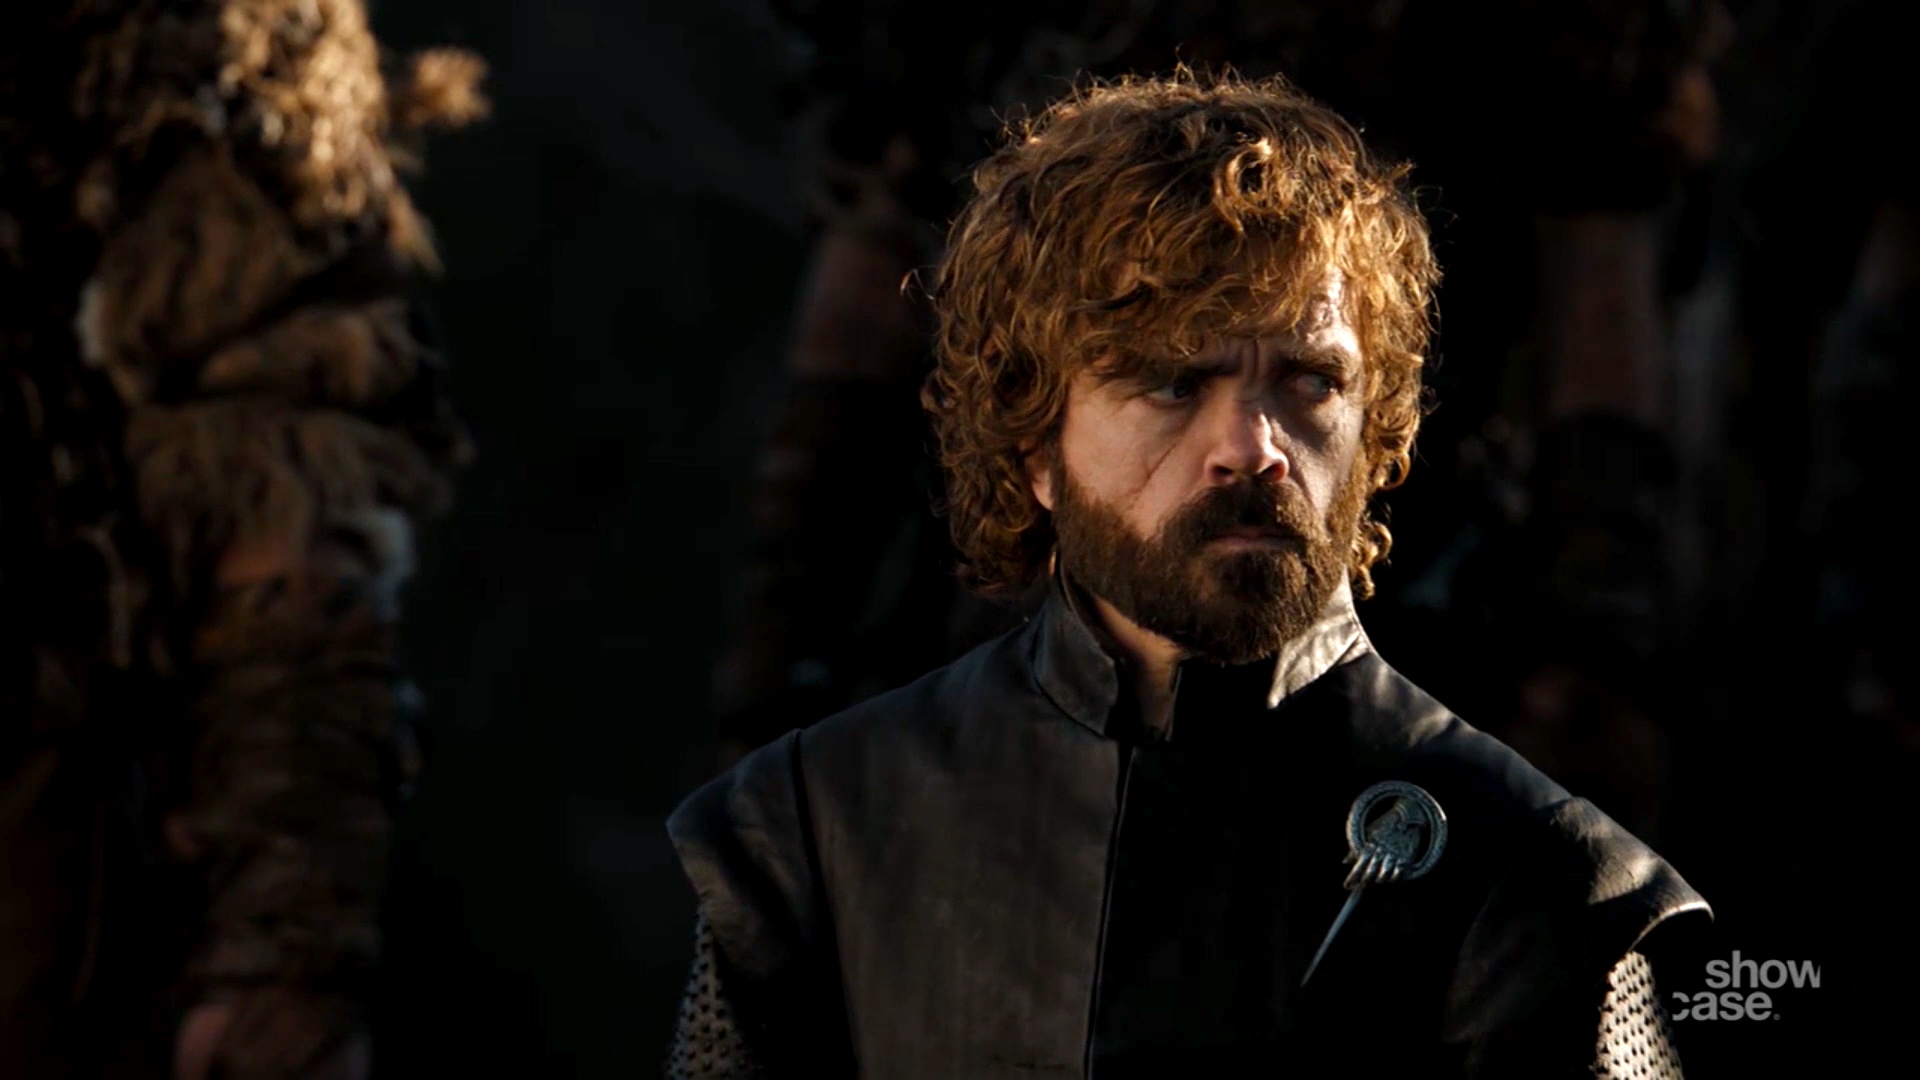 Game of thrones season 5 hd mp4 download